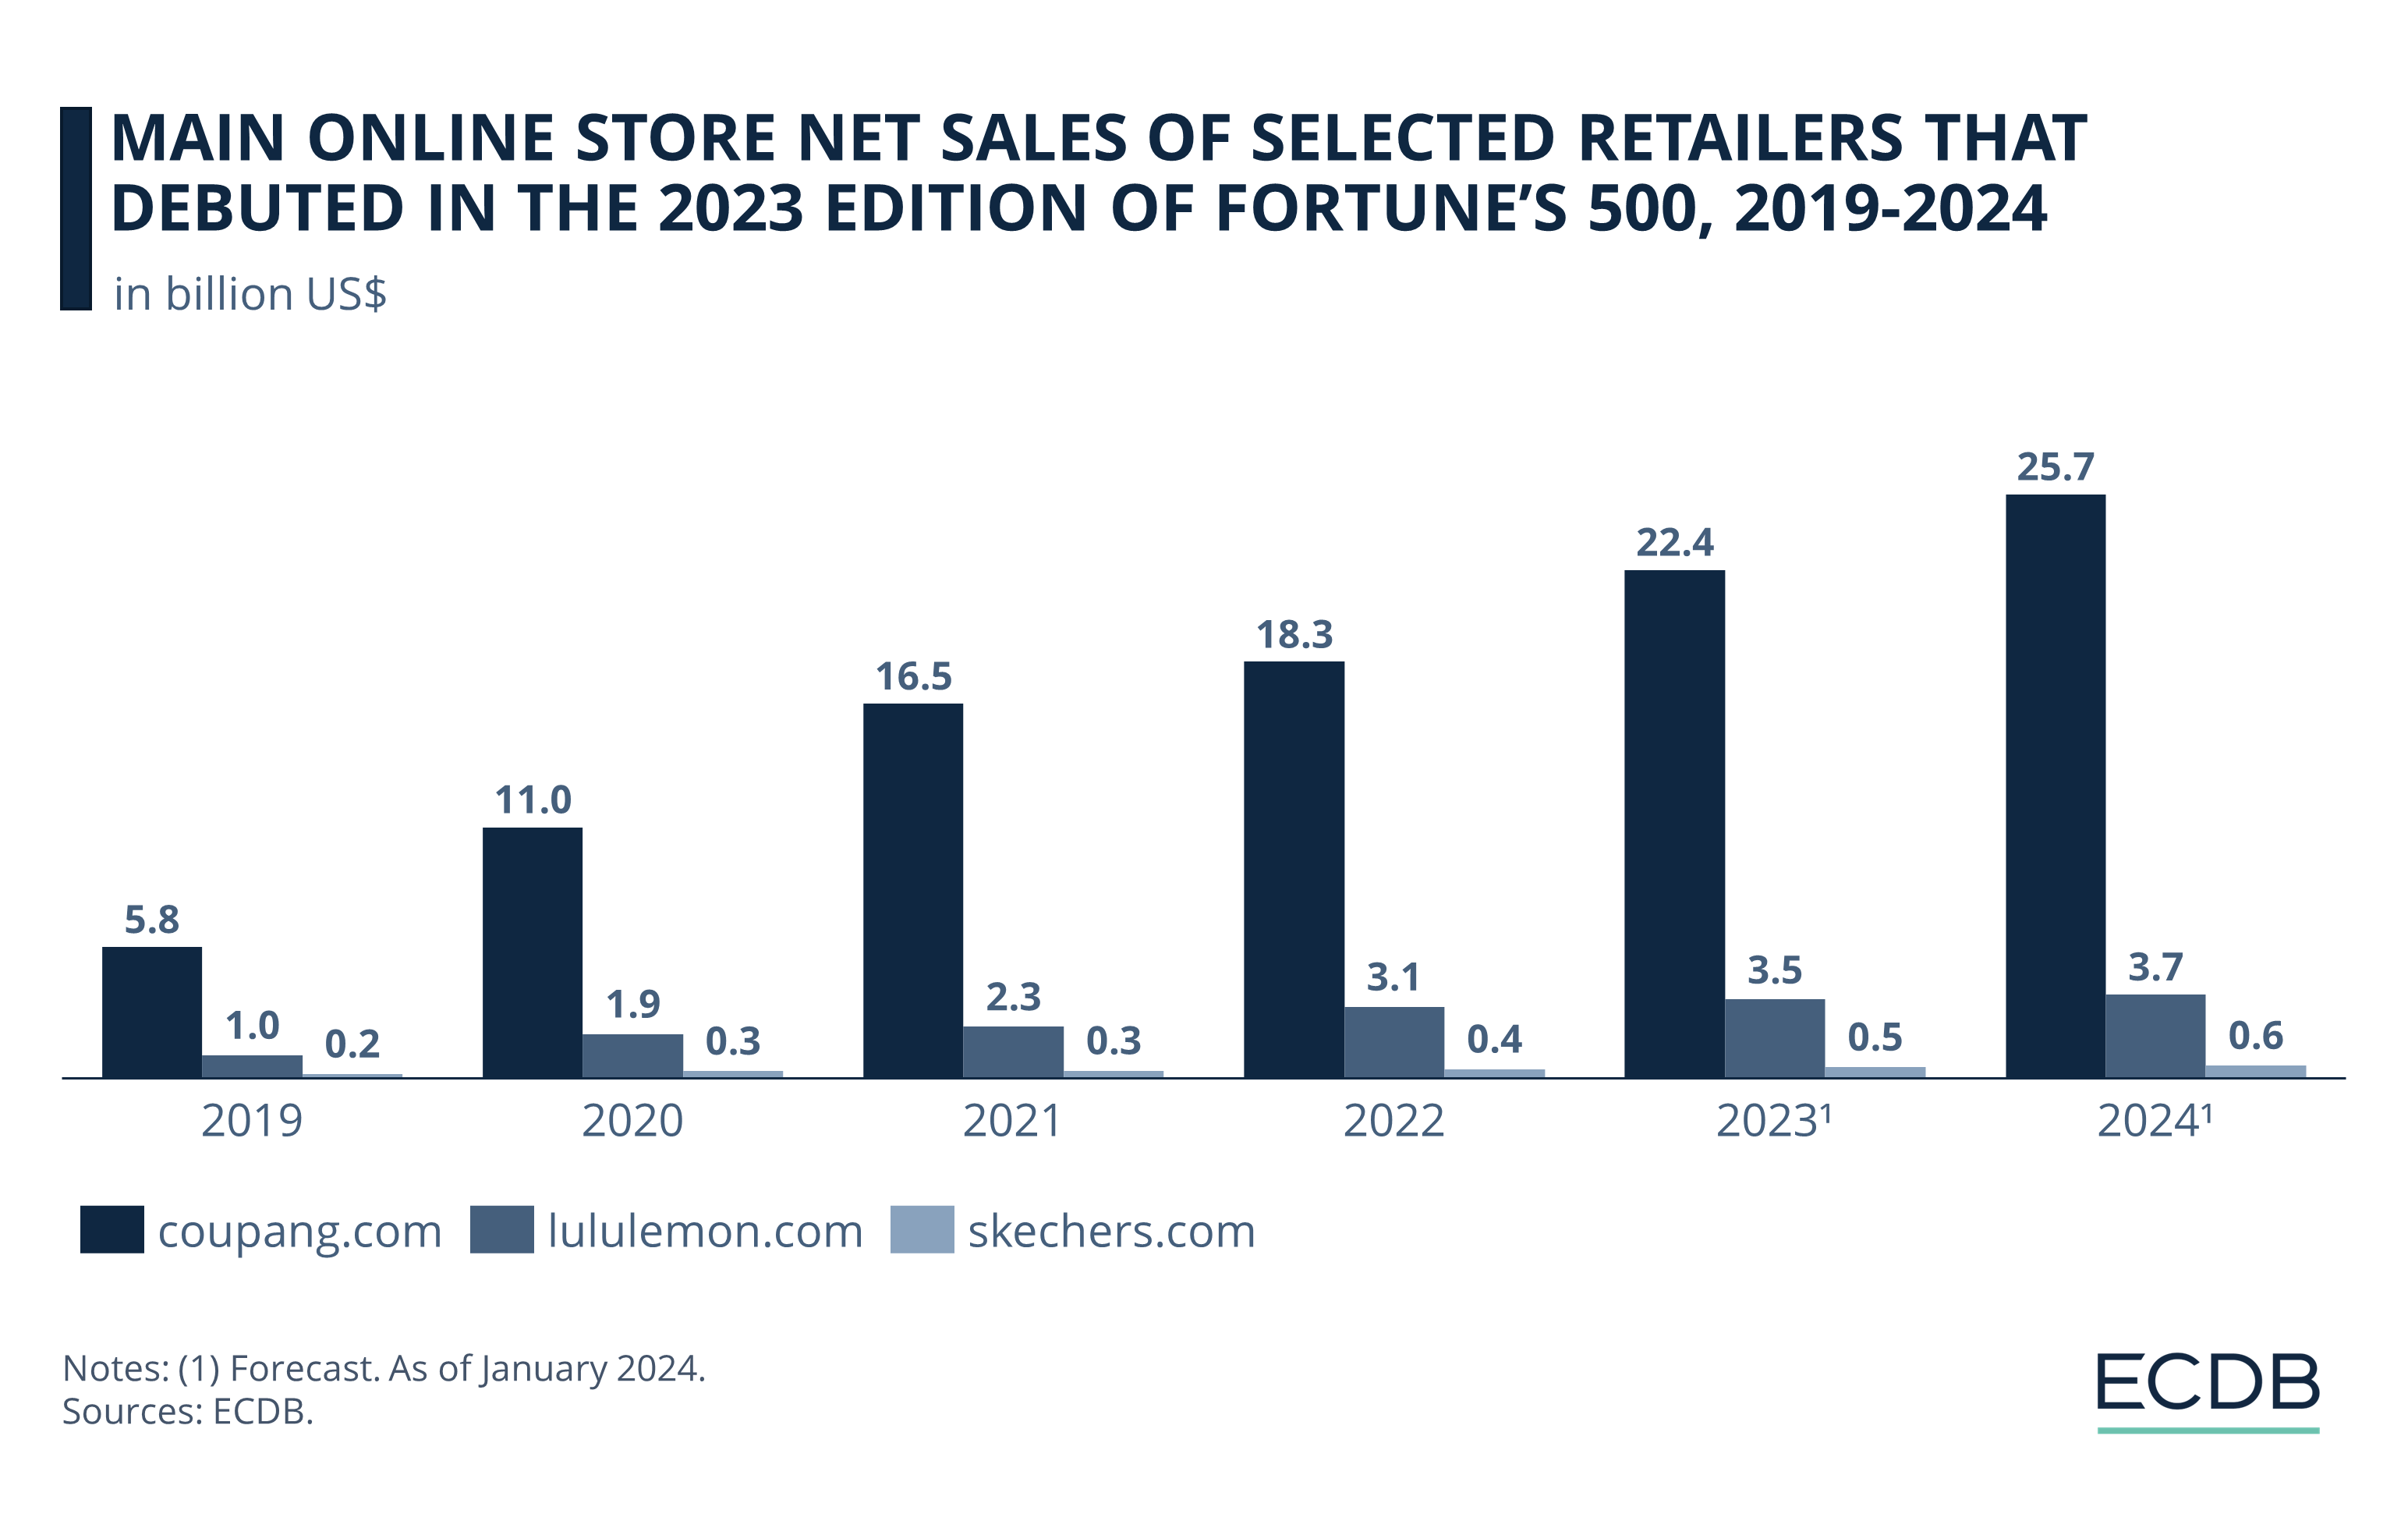 Main Online Store Net Sales of Selected Retailers That Debuted in the 2023 Edition of Fortune’s 500, 2019-2024